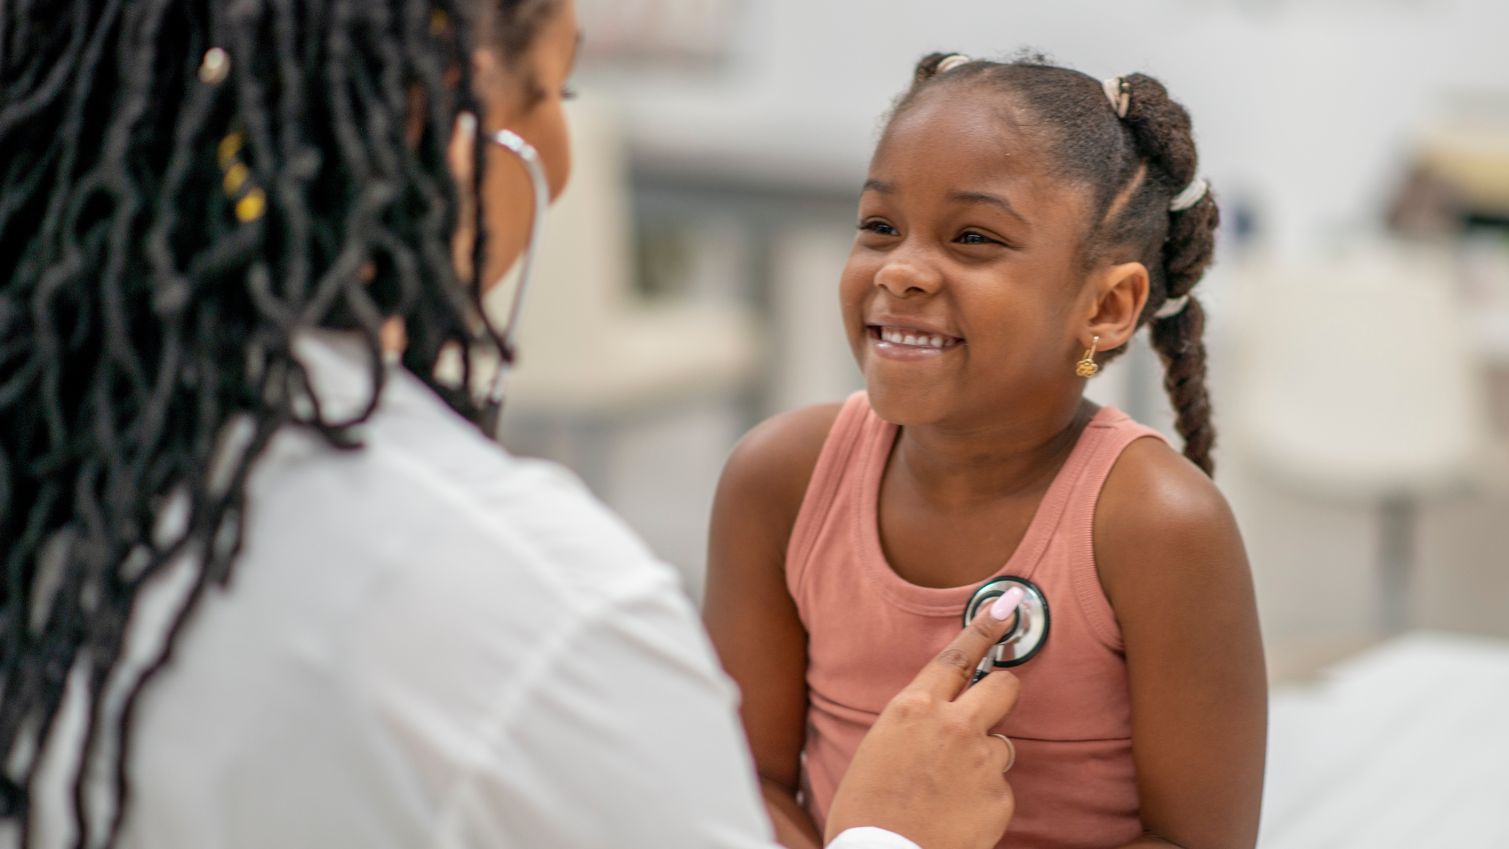 Medicaid doctor listens to girl's heartbeat